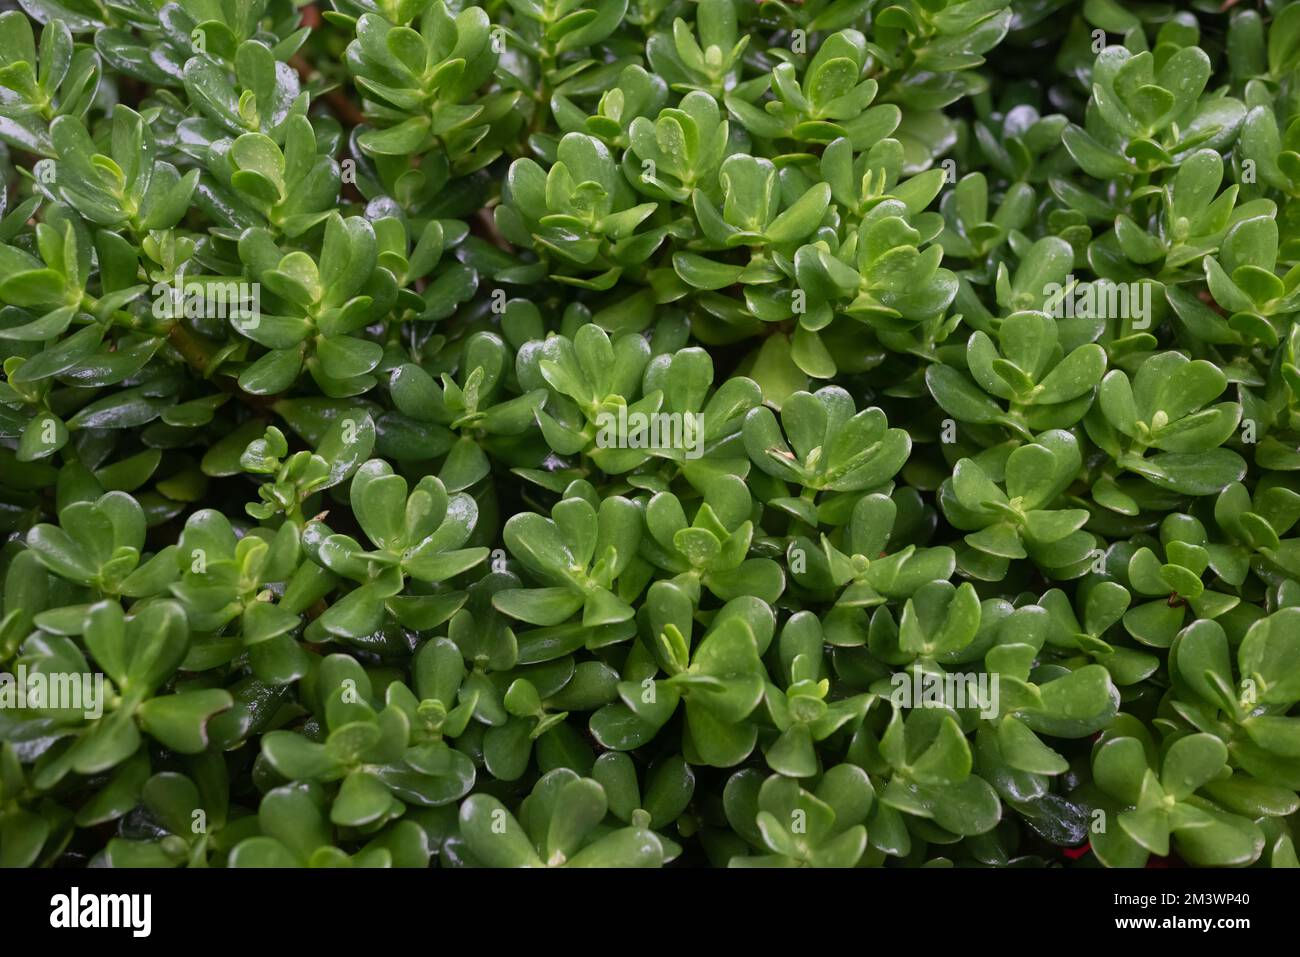 Jade plant background with raindrops. Green leaves closeup in rainy weather Stock Photo